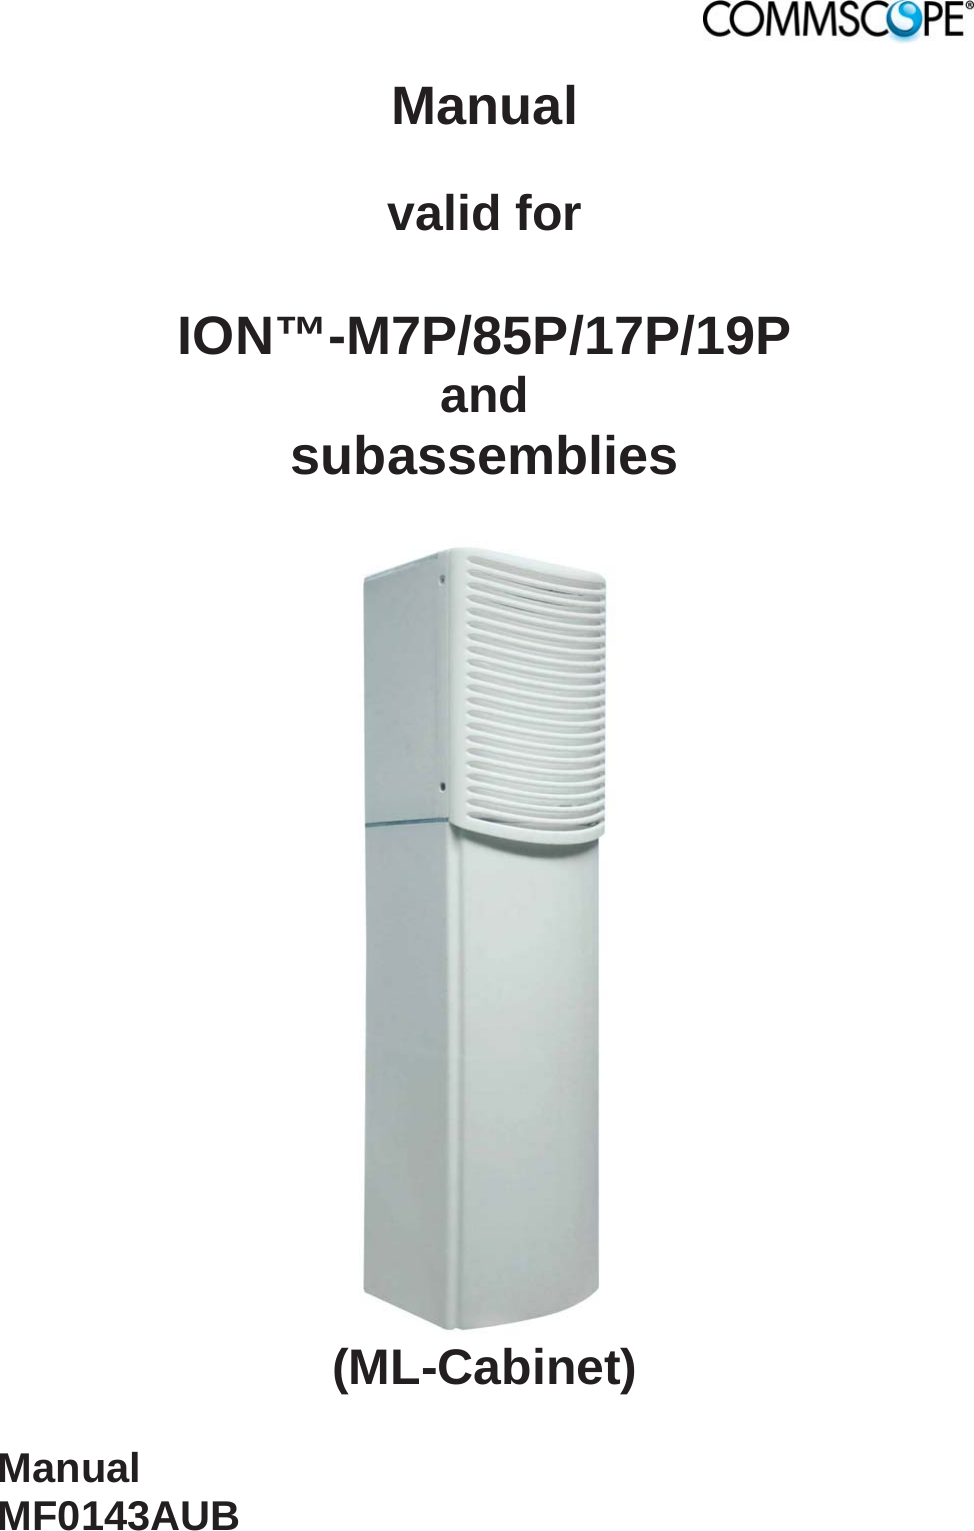  Manual  valid for  ION™-M7P/85P/17P/19P  and subassemblies   (ML-Cabinet)  Manual MF0143AUB  